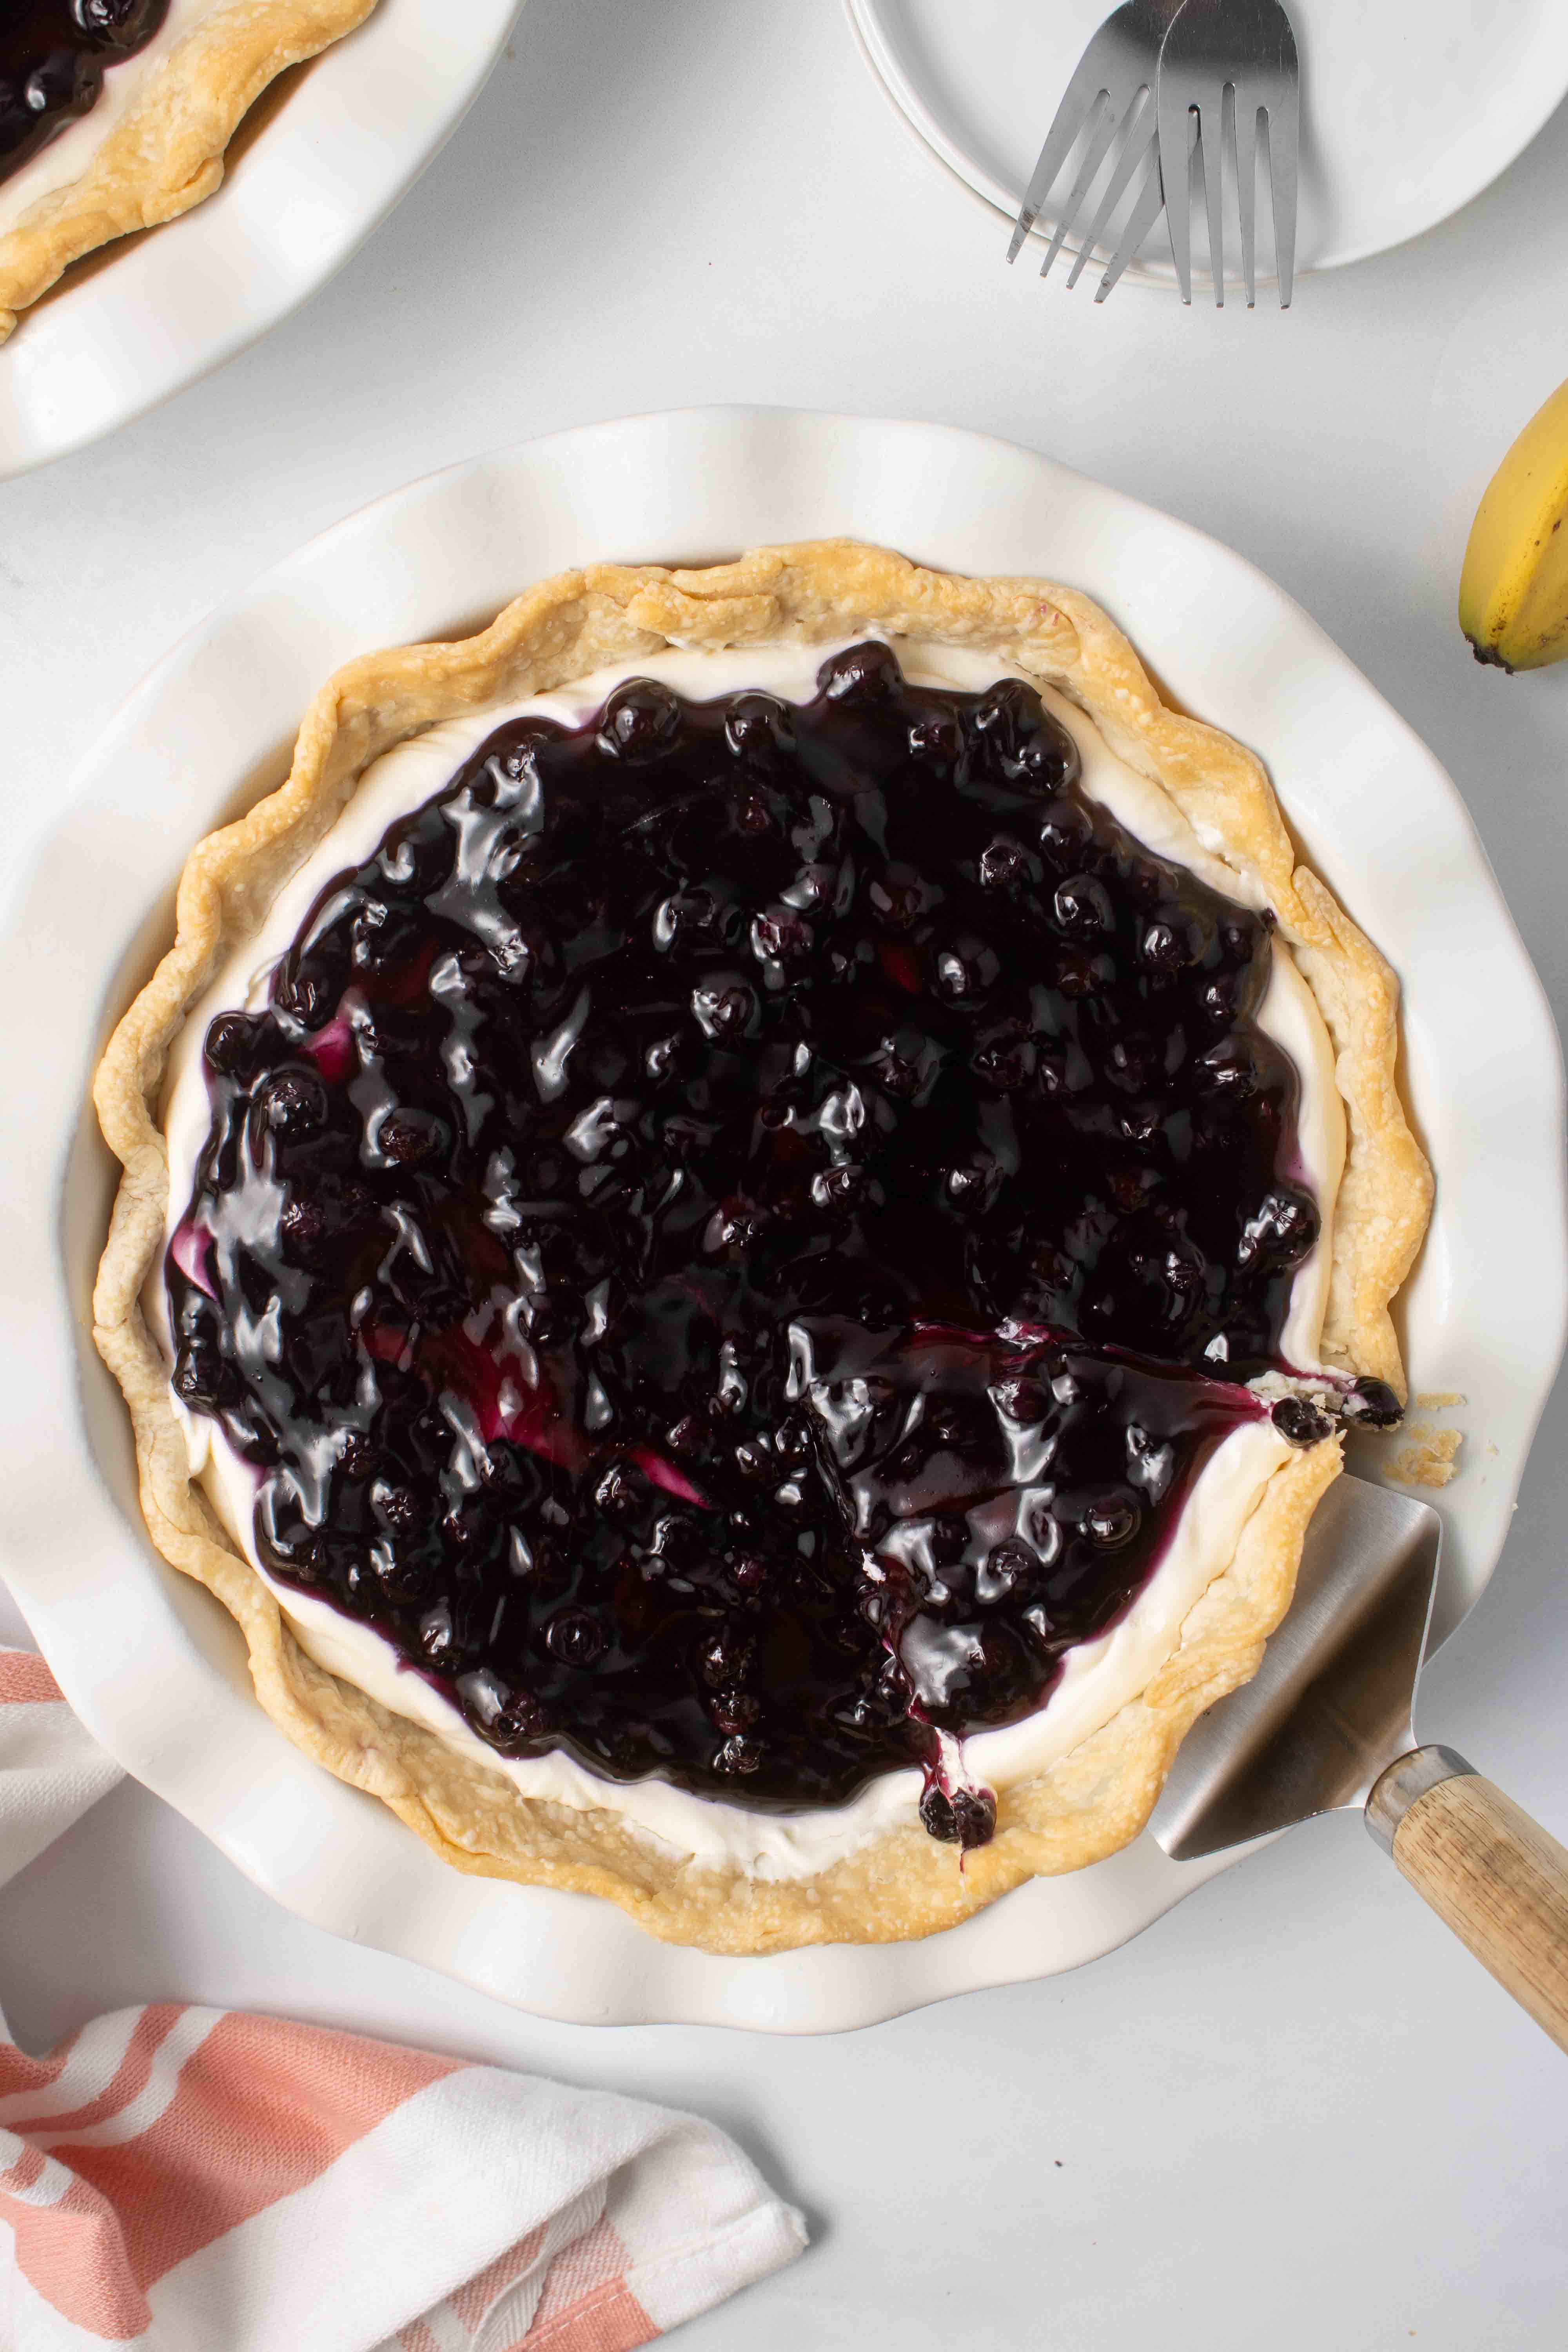 Overhead view of a blueberry banana pie with a slice being lifted out.